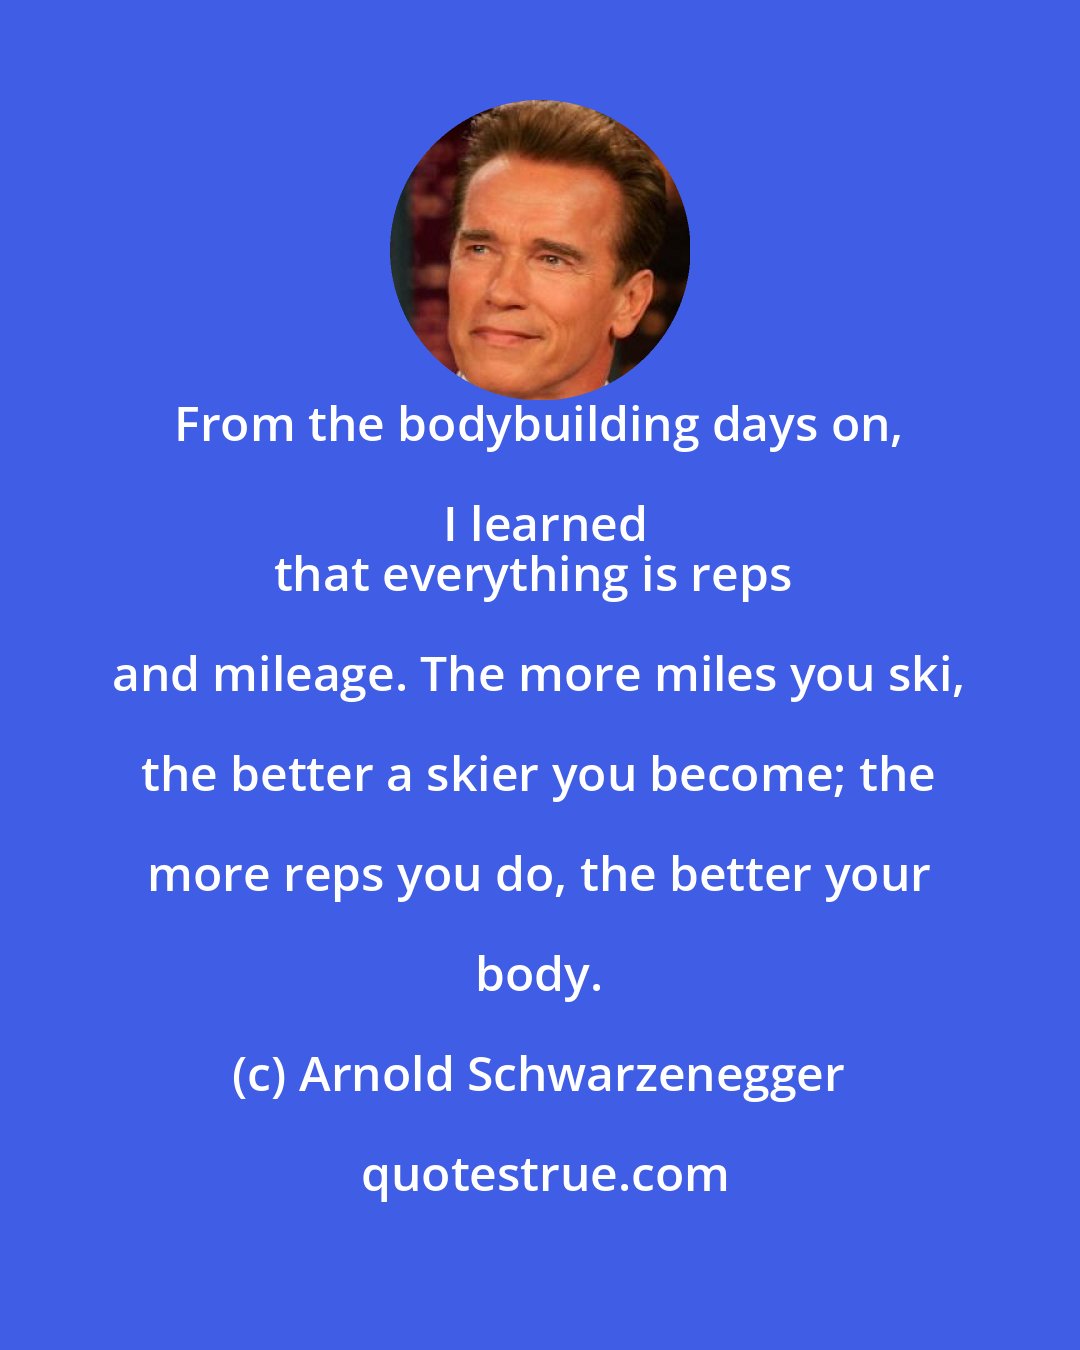 Arnold Schwarzenegger: From the bodybuilding days on, I learned
that everything is reps and mileage. The more miles you ski, the better a skier you become; the more reps you do, the better your body.